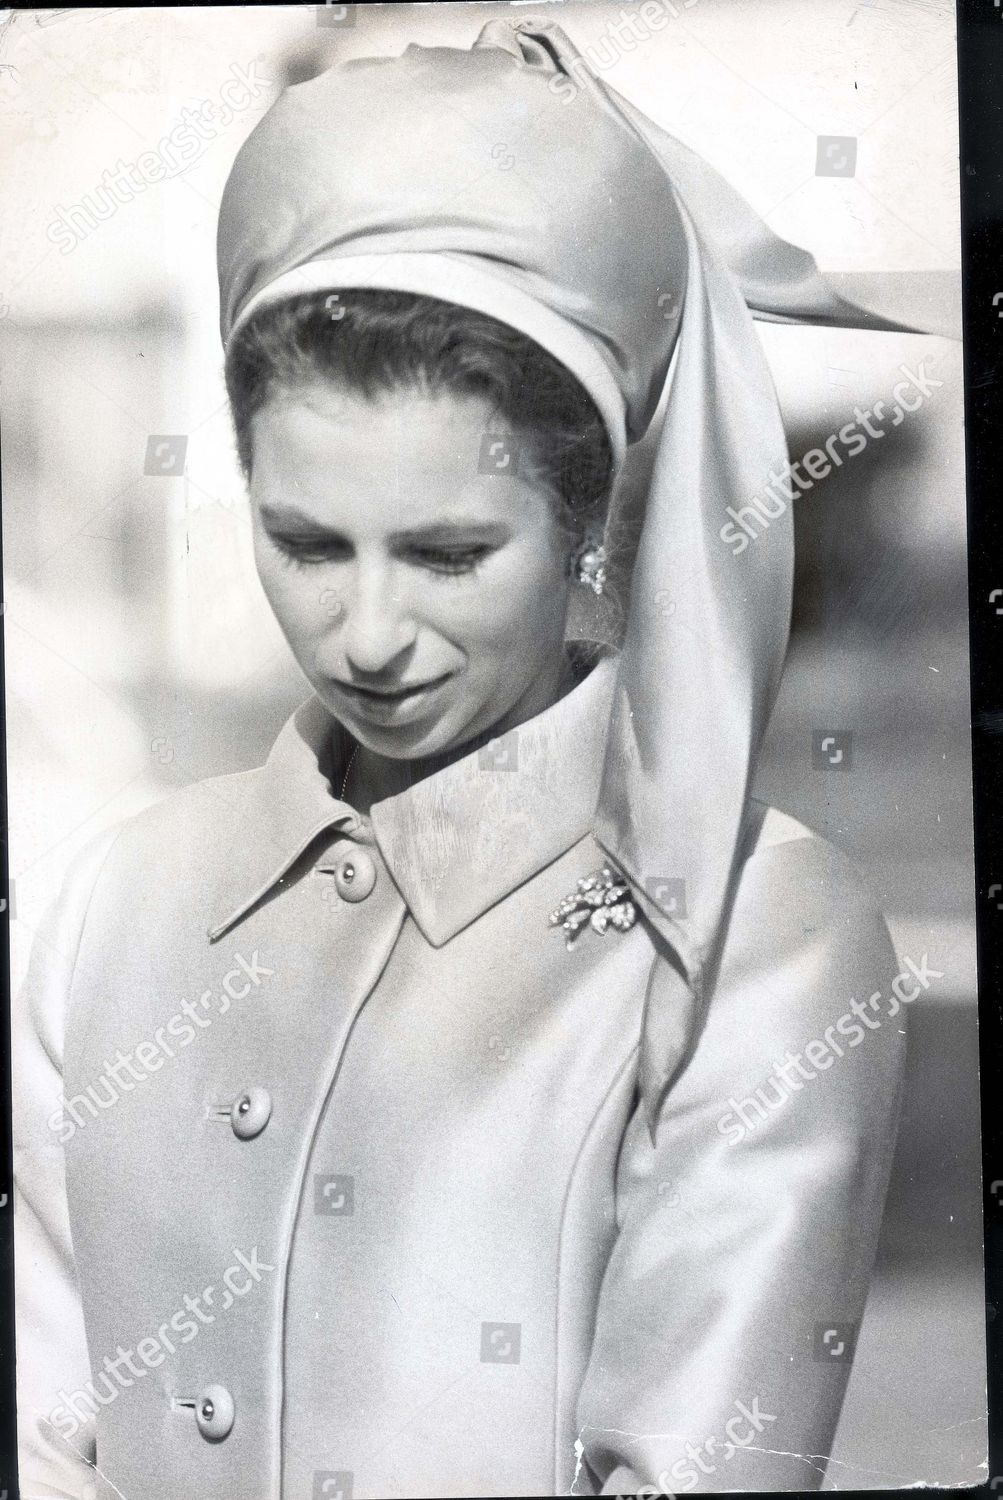 princess-anne-now-princess-royal-september-1970-hats-have-always-been-something-of-a-royal-talent-picking-them-that-is-yesterday-it-was-princess-annes-turn-to-put-the-talent-on-show-and-she-did-it-with-this-lime-green-turban-with-streamers-wor-shutterstock-editorial-1100224a.jpg